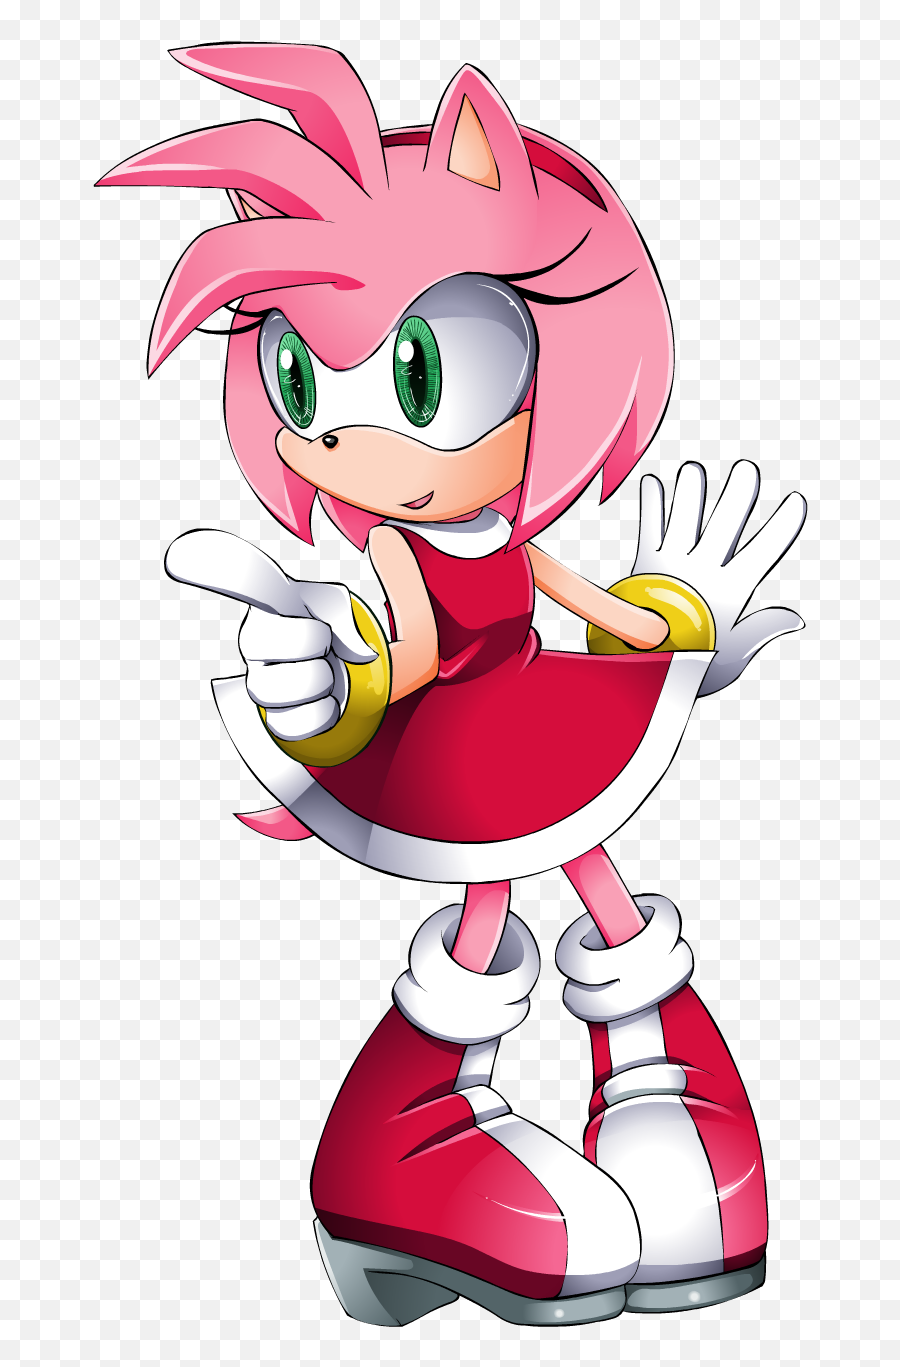 Download Free Png Amy Rose - Amy Rose Transparent,Amy Rose Png